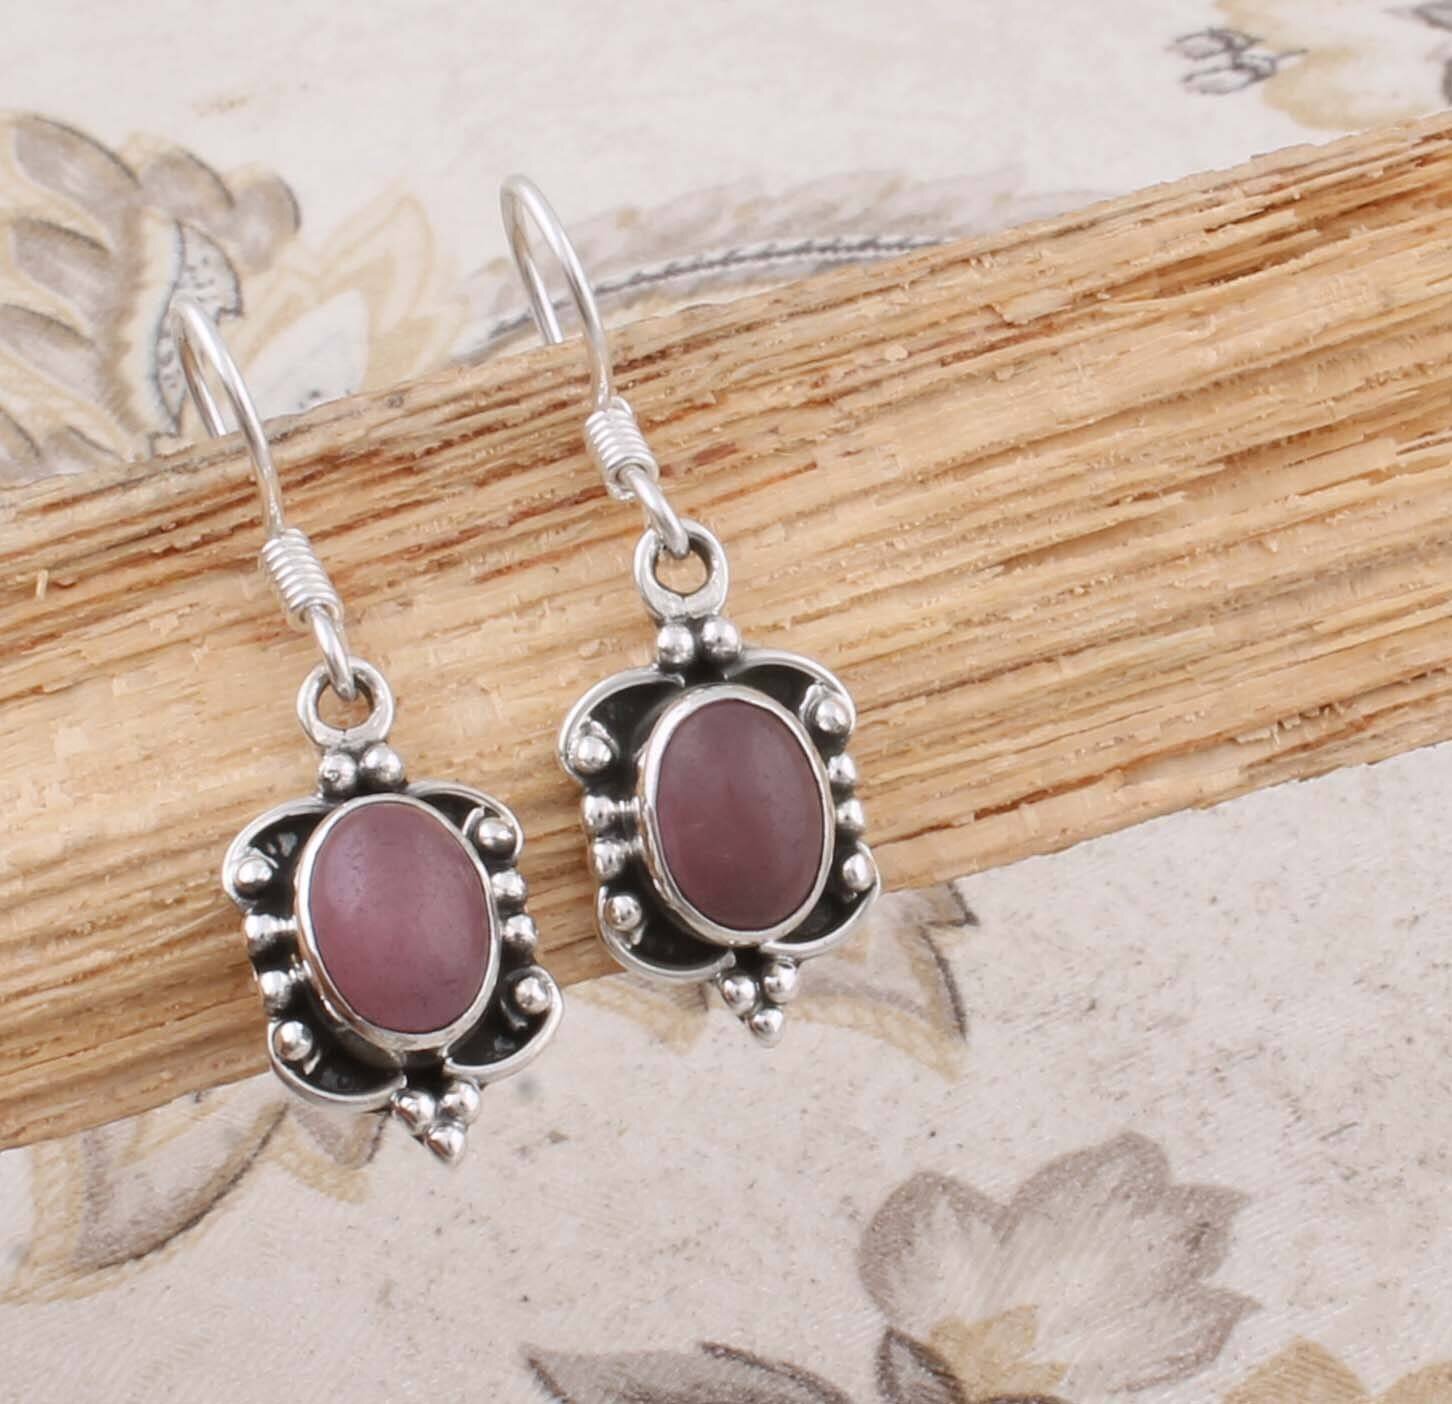 Real Pink Jade Top Quality Gemstone Handmade Earring Cabochon Stone Boho Earring 925-Antique Silver Earring Etsy Cyber Valentine's Day Gift